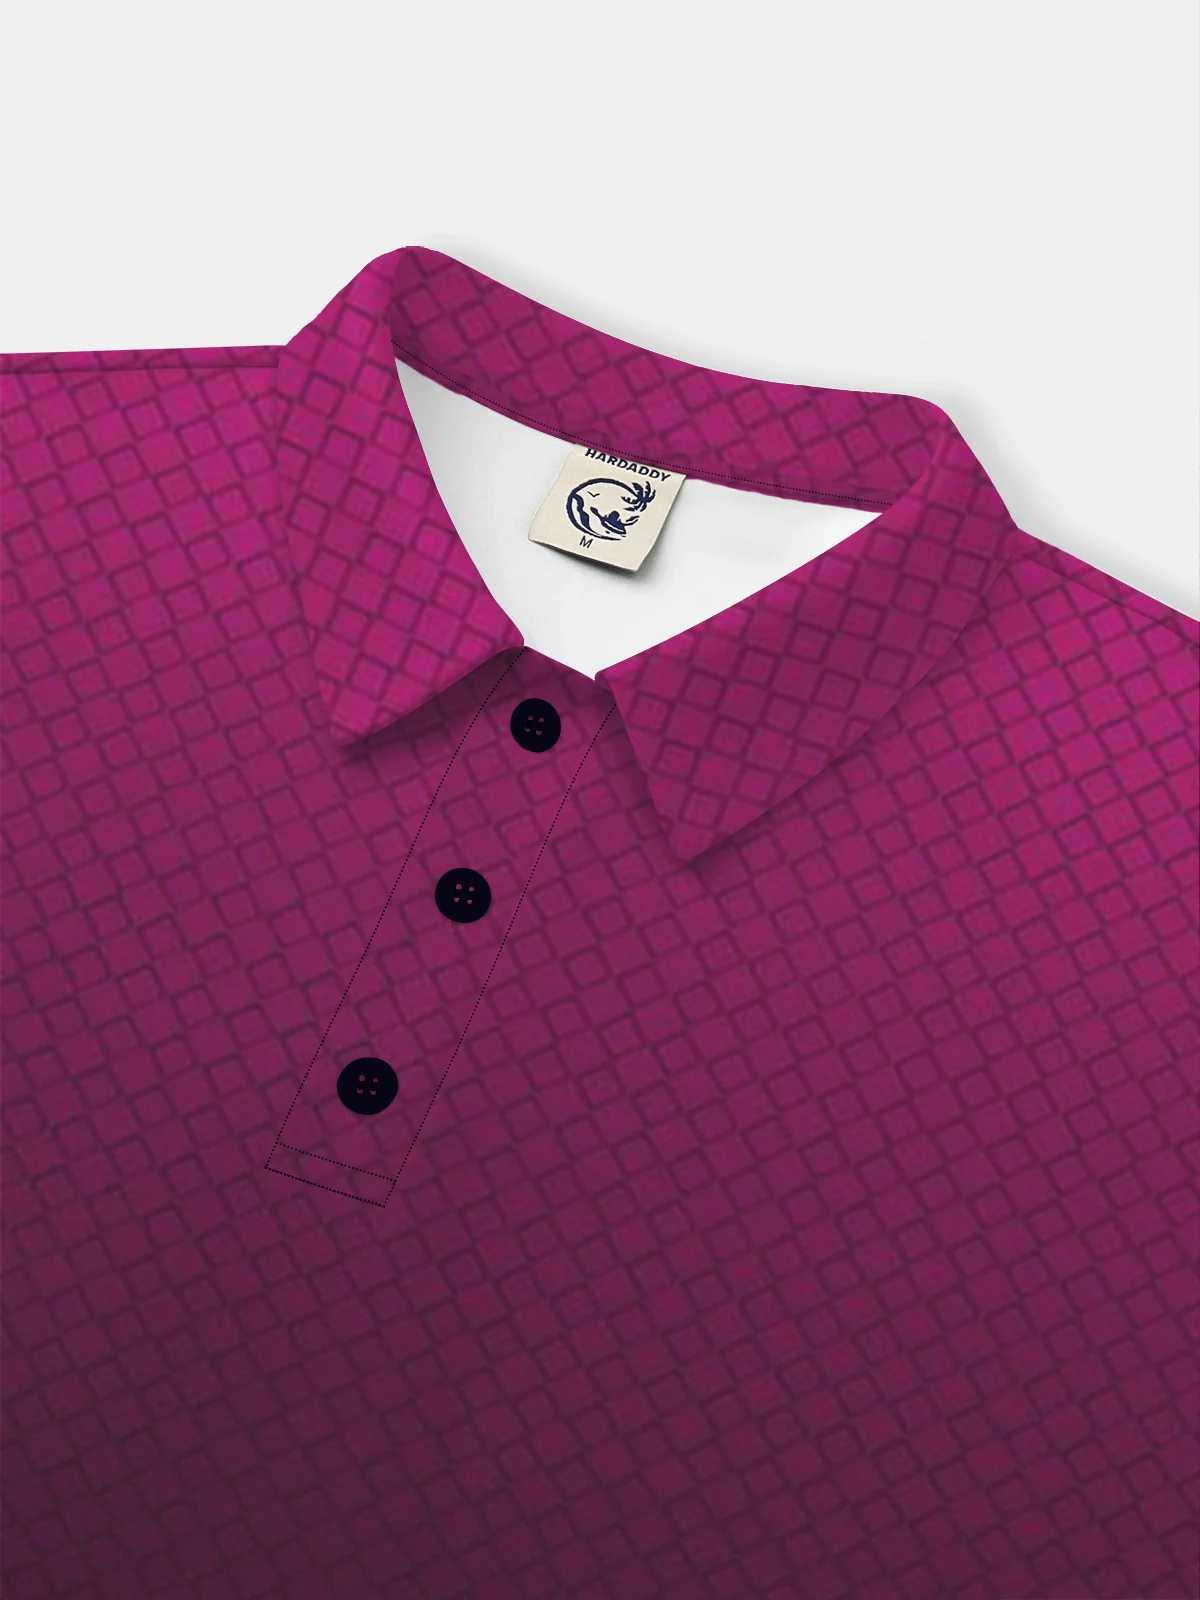 Hardaddy Moisture-wicking Golf Polo 3D Gradient Color Geometry